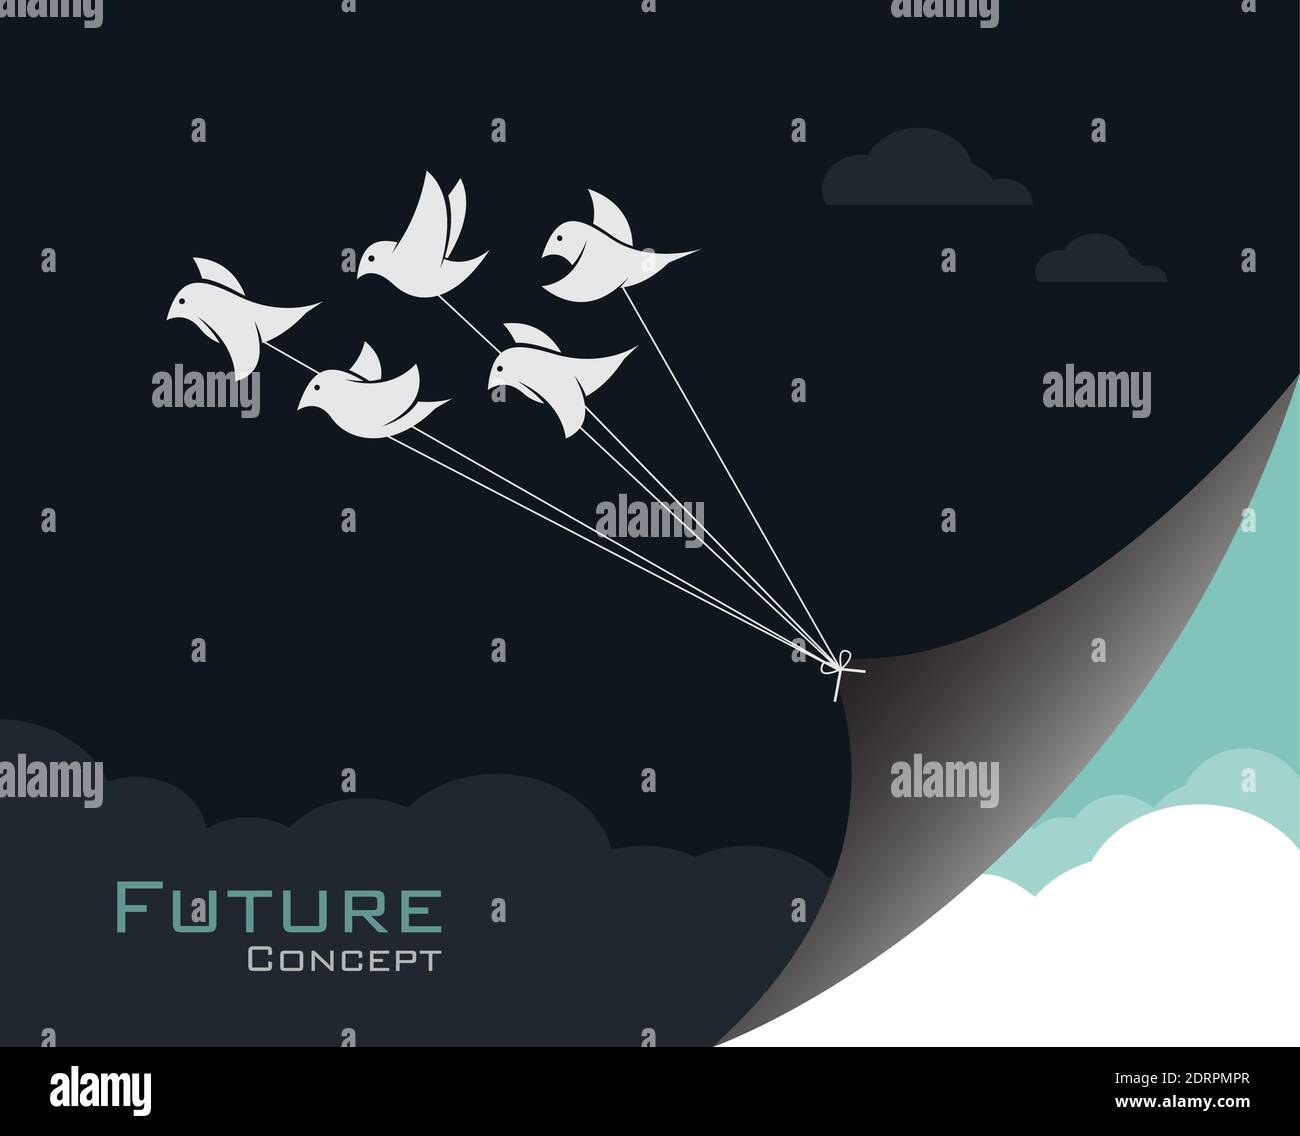 Vector image of birds changing reality. Easy editable layered vector illustration. Stock Vector